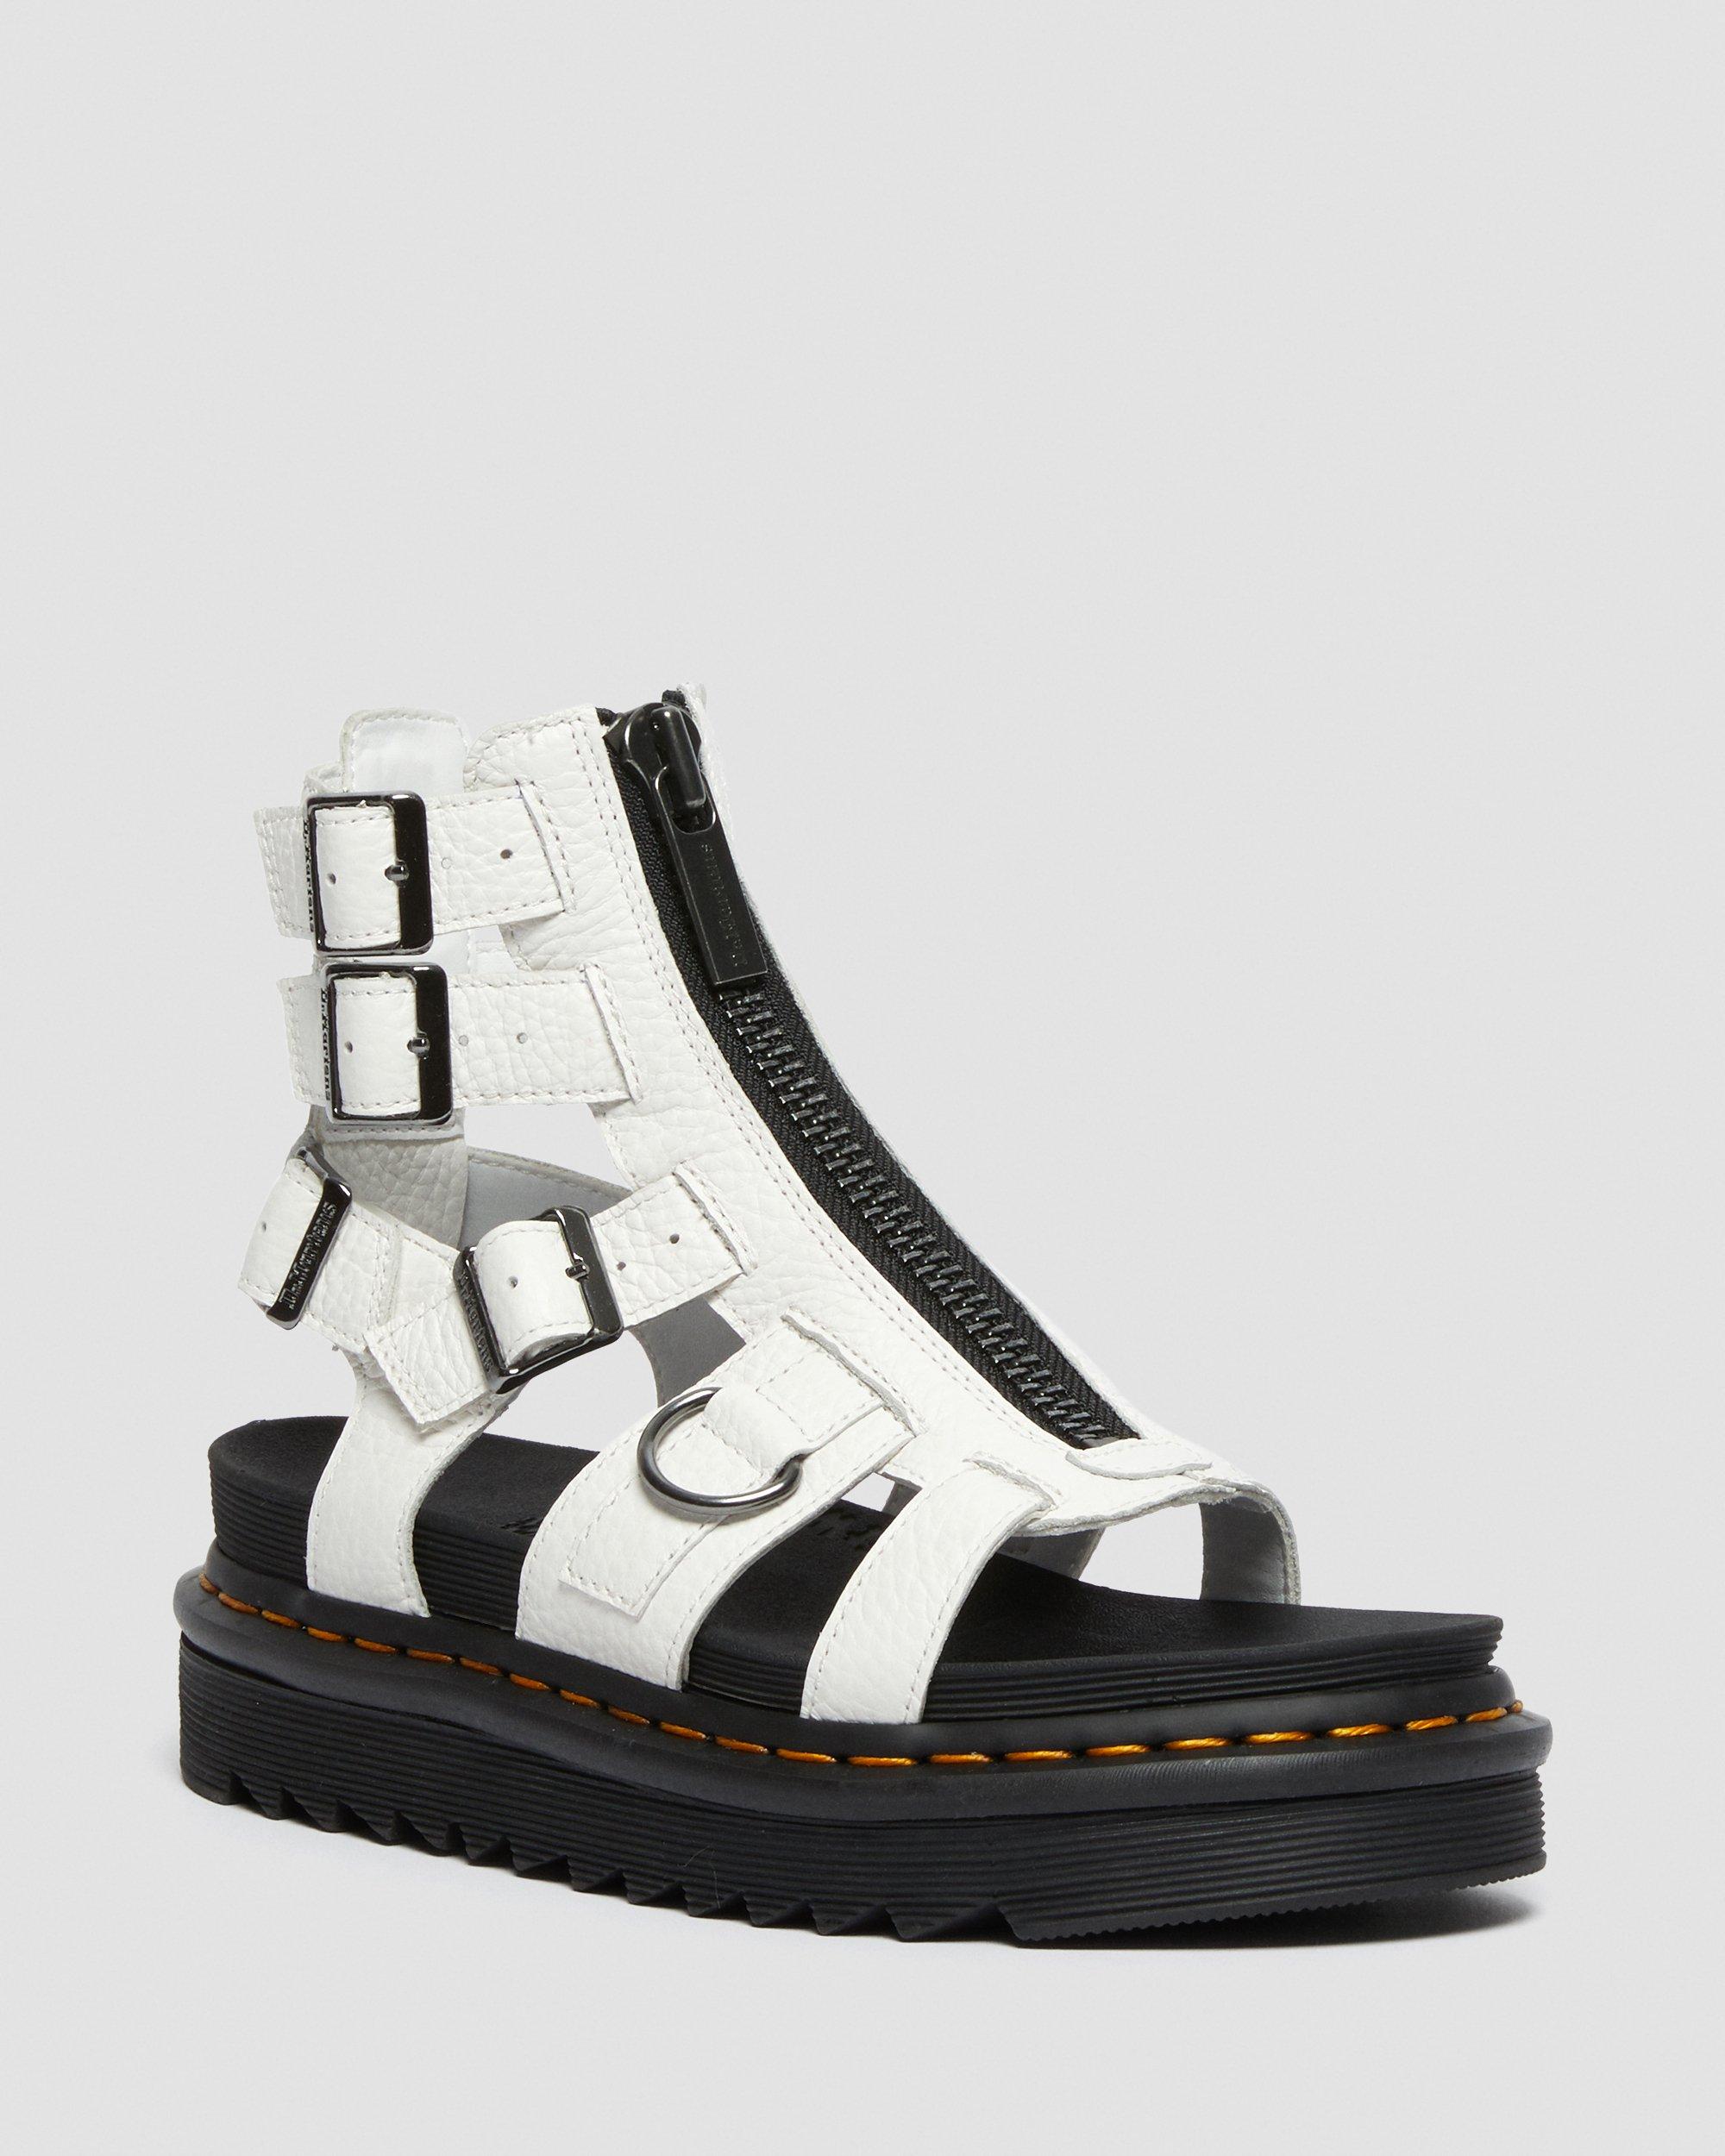 Olson Zipped Leather Strap Sandals in White | Dr. Martens